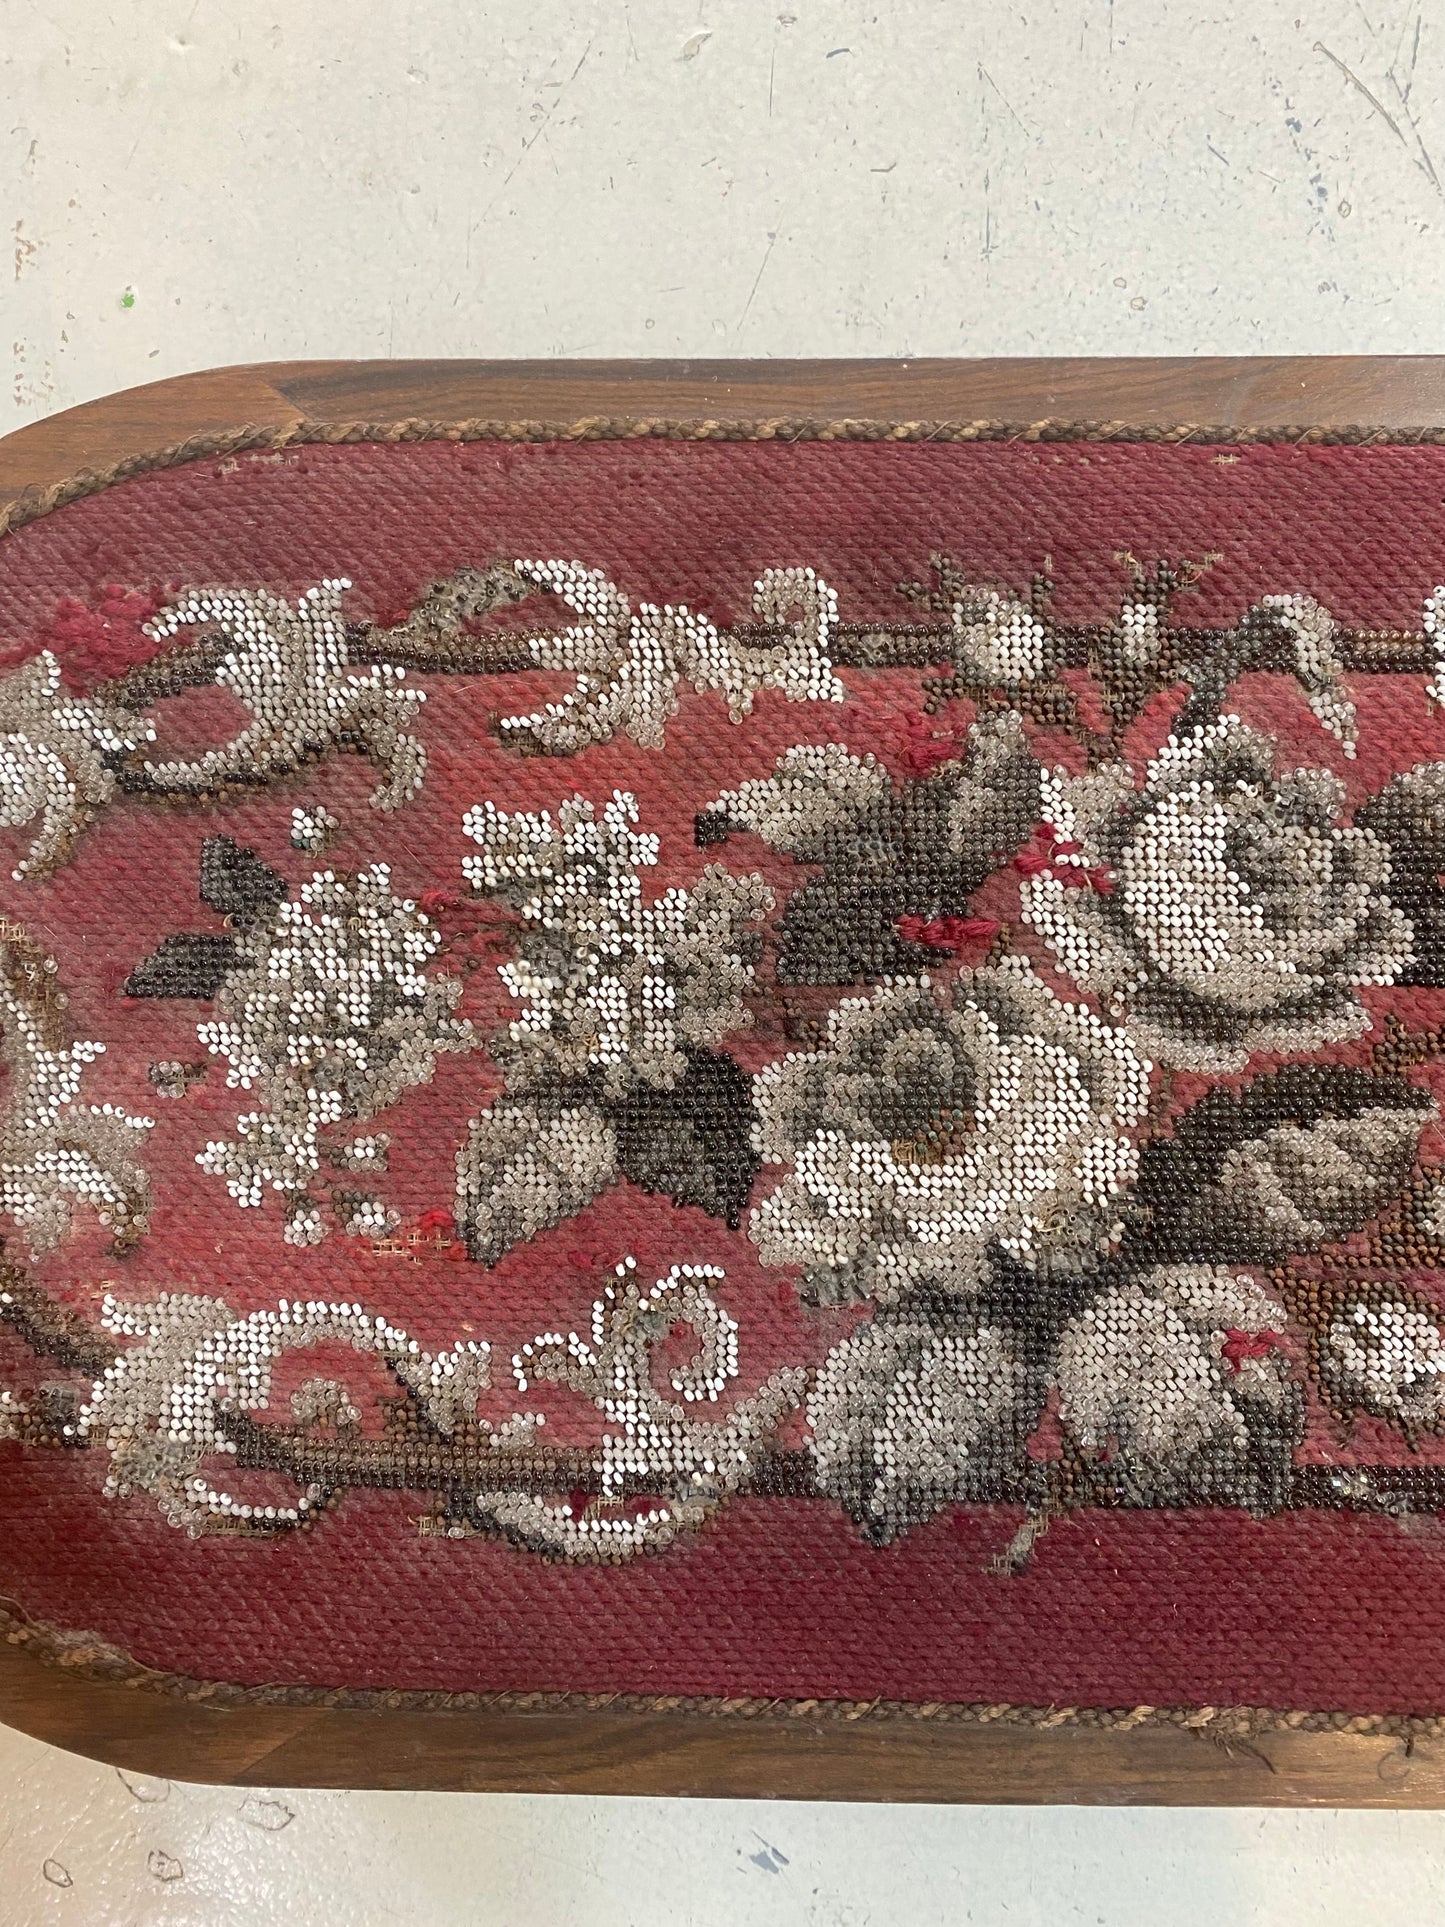 Red and Grey Roses Antique Beaded Footstool, English, Kneeling Stool, Victorian, Circa 1860